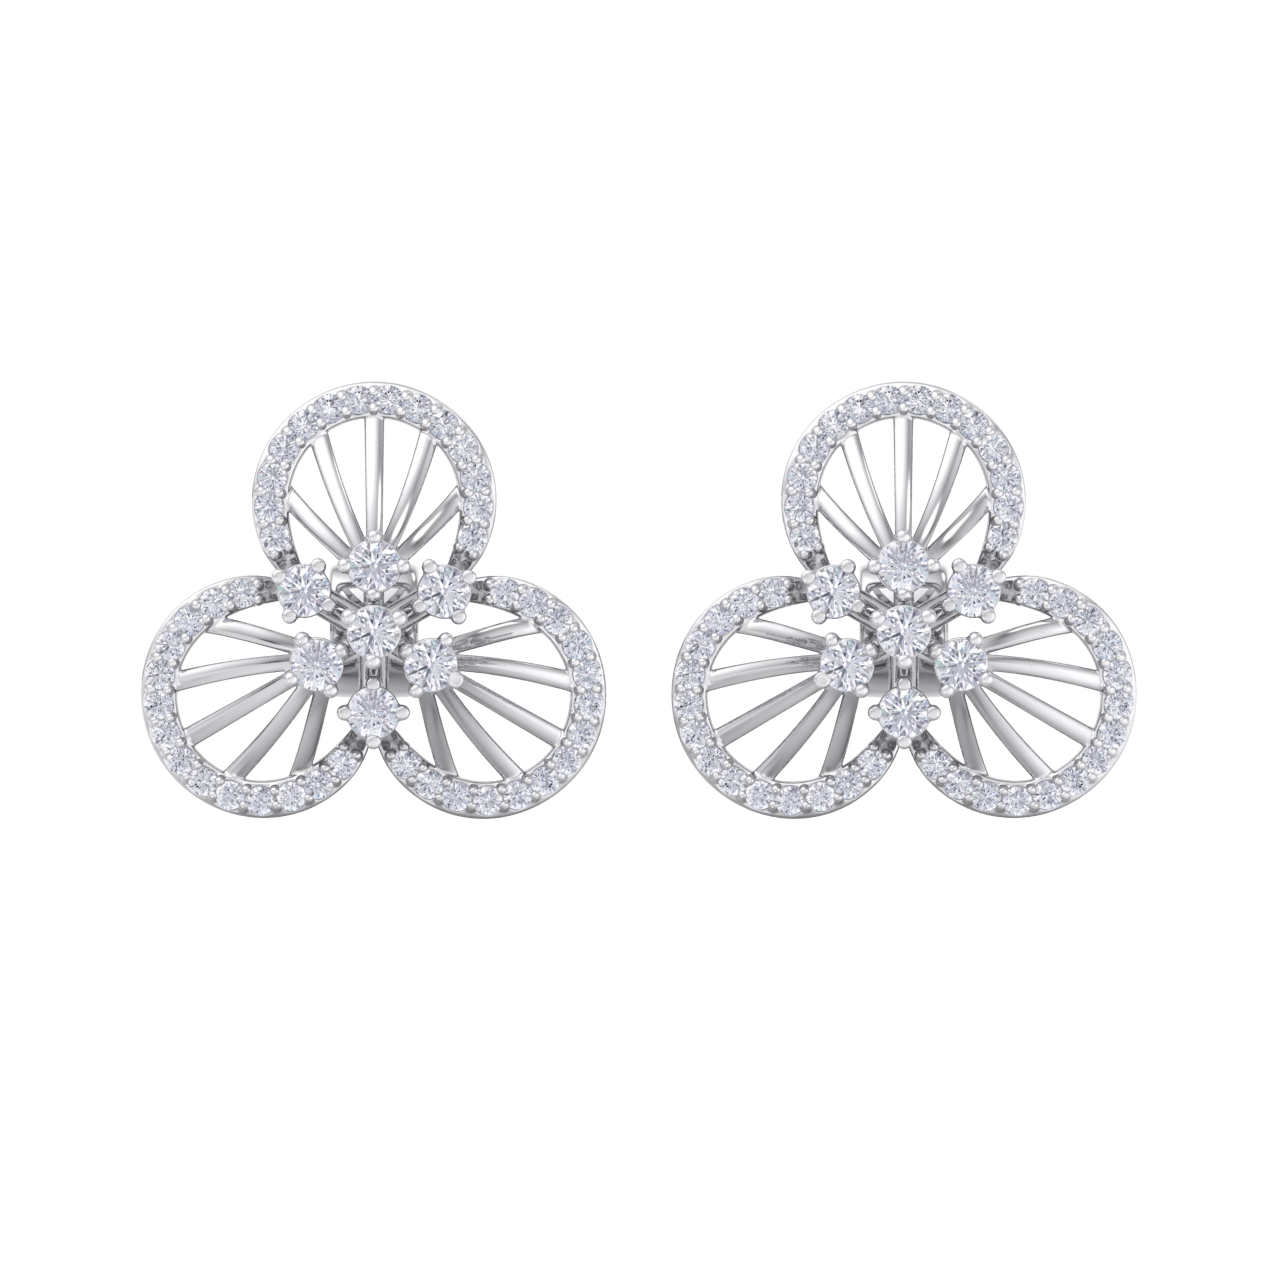 Flower shaped stud earrings in white gold with white diamonds of 0.84 ct in weight